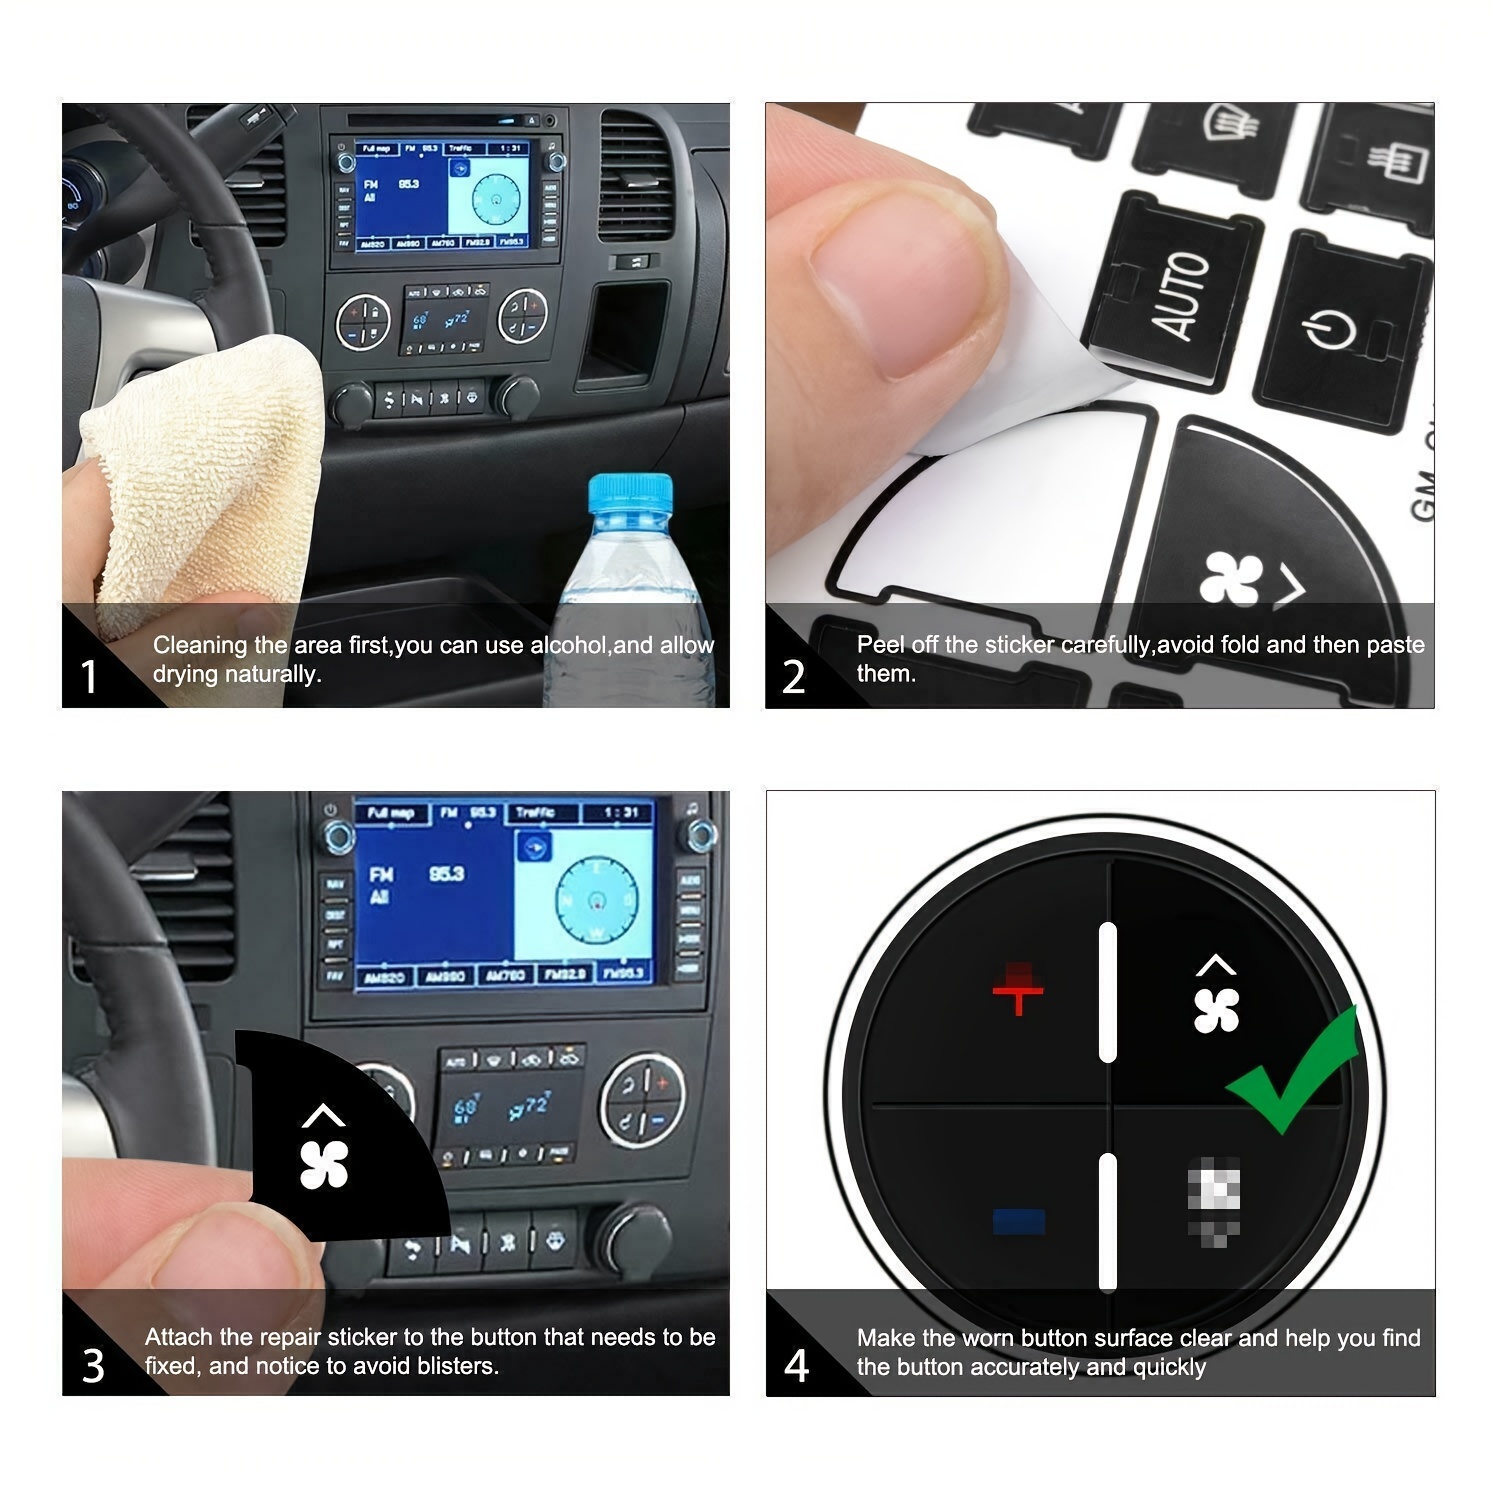 AC Dash Button Repair Kit, Car Button Decals - Best for Fixing